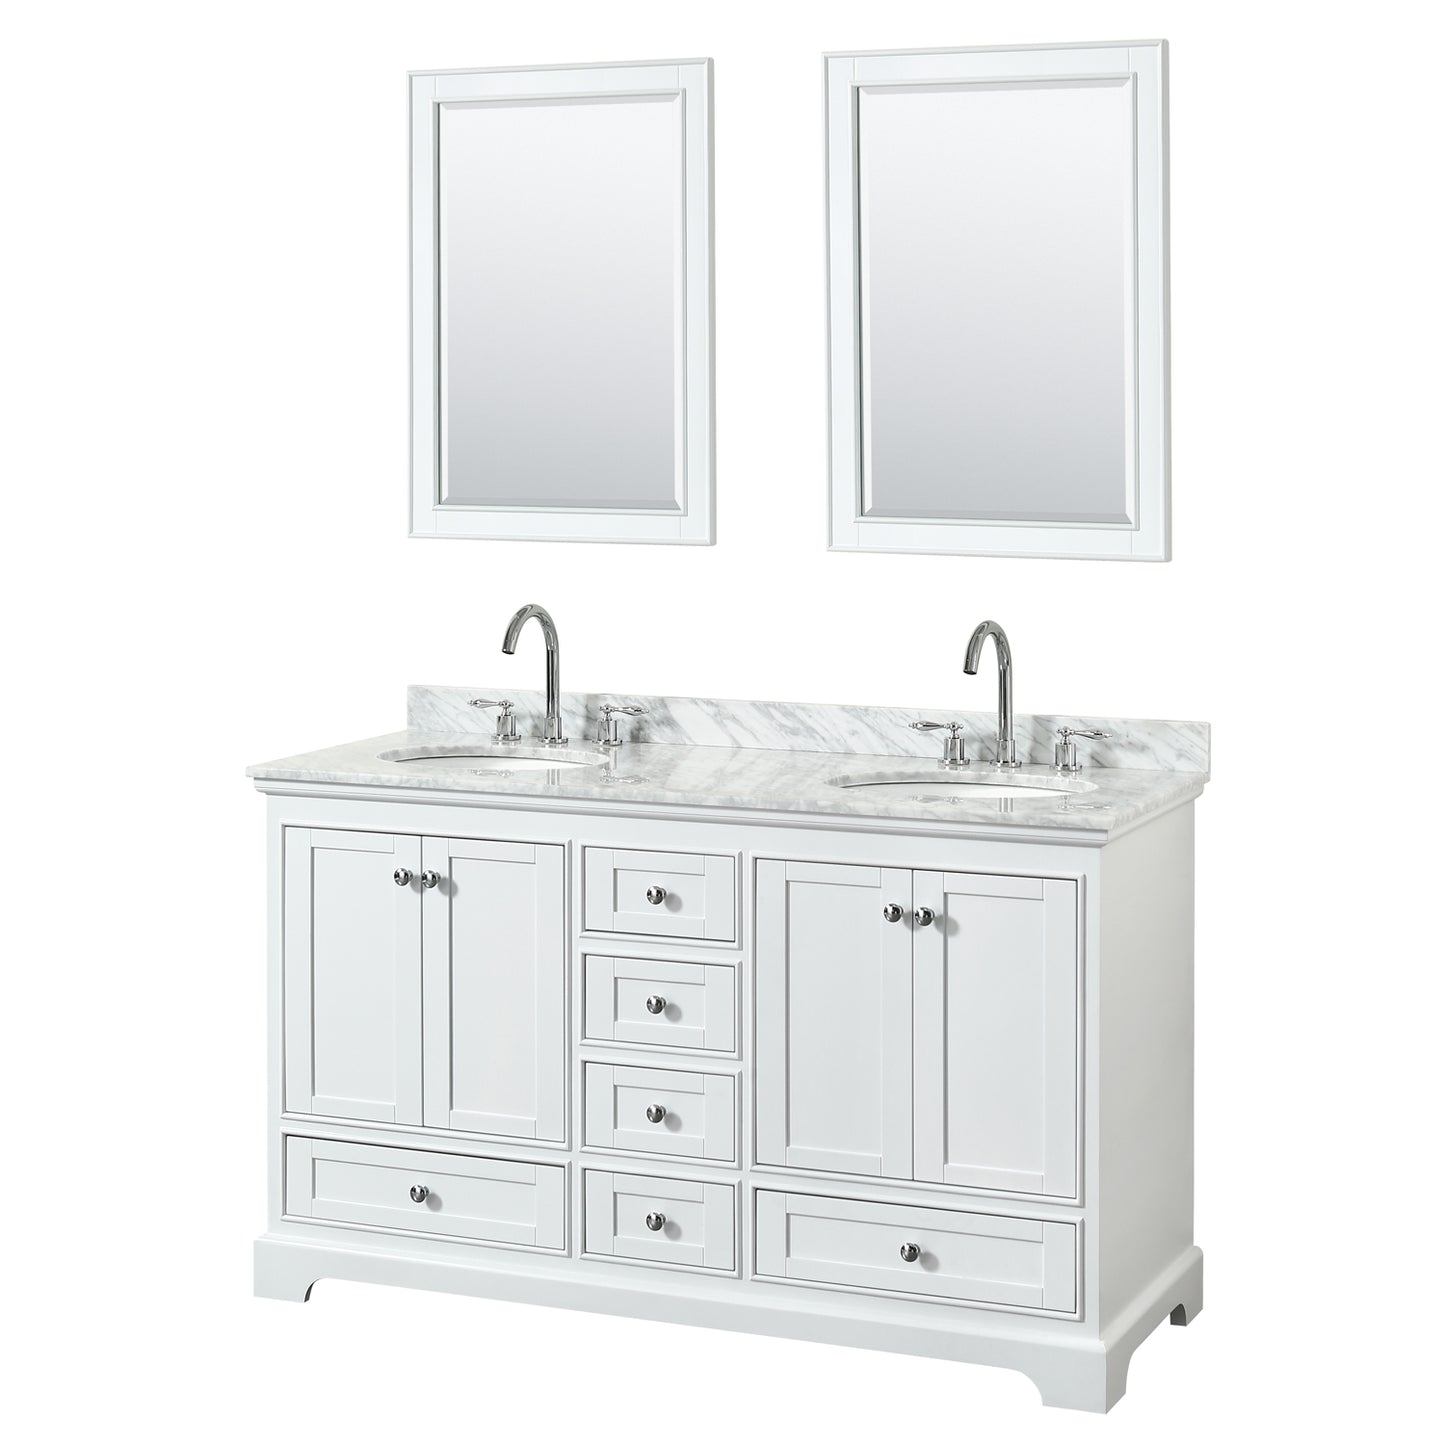 60 Inch Double Bathroom Vanity, White Carrara Marble Countertop, Undermount Oval Sinks, and 24 Inch Mirrors - Luxe Bathroom Vanities Luxury Bathroom Fixtures Bathroom Furniture